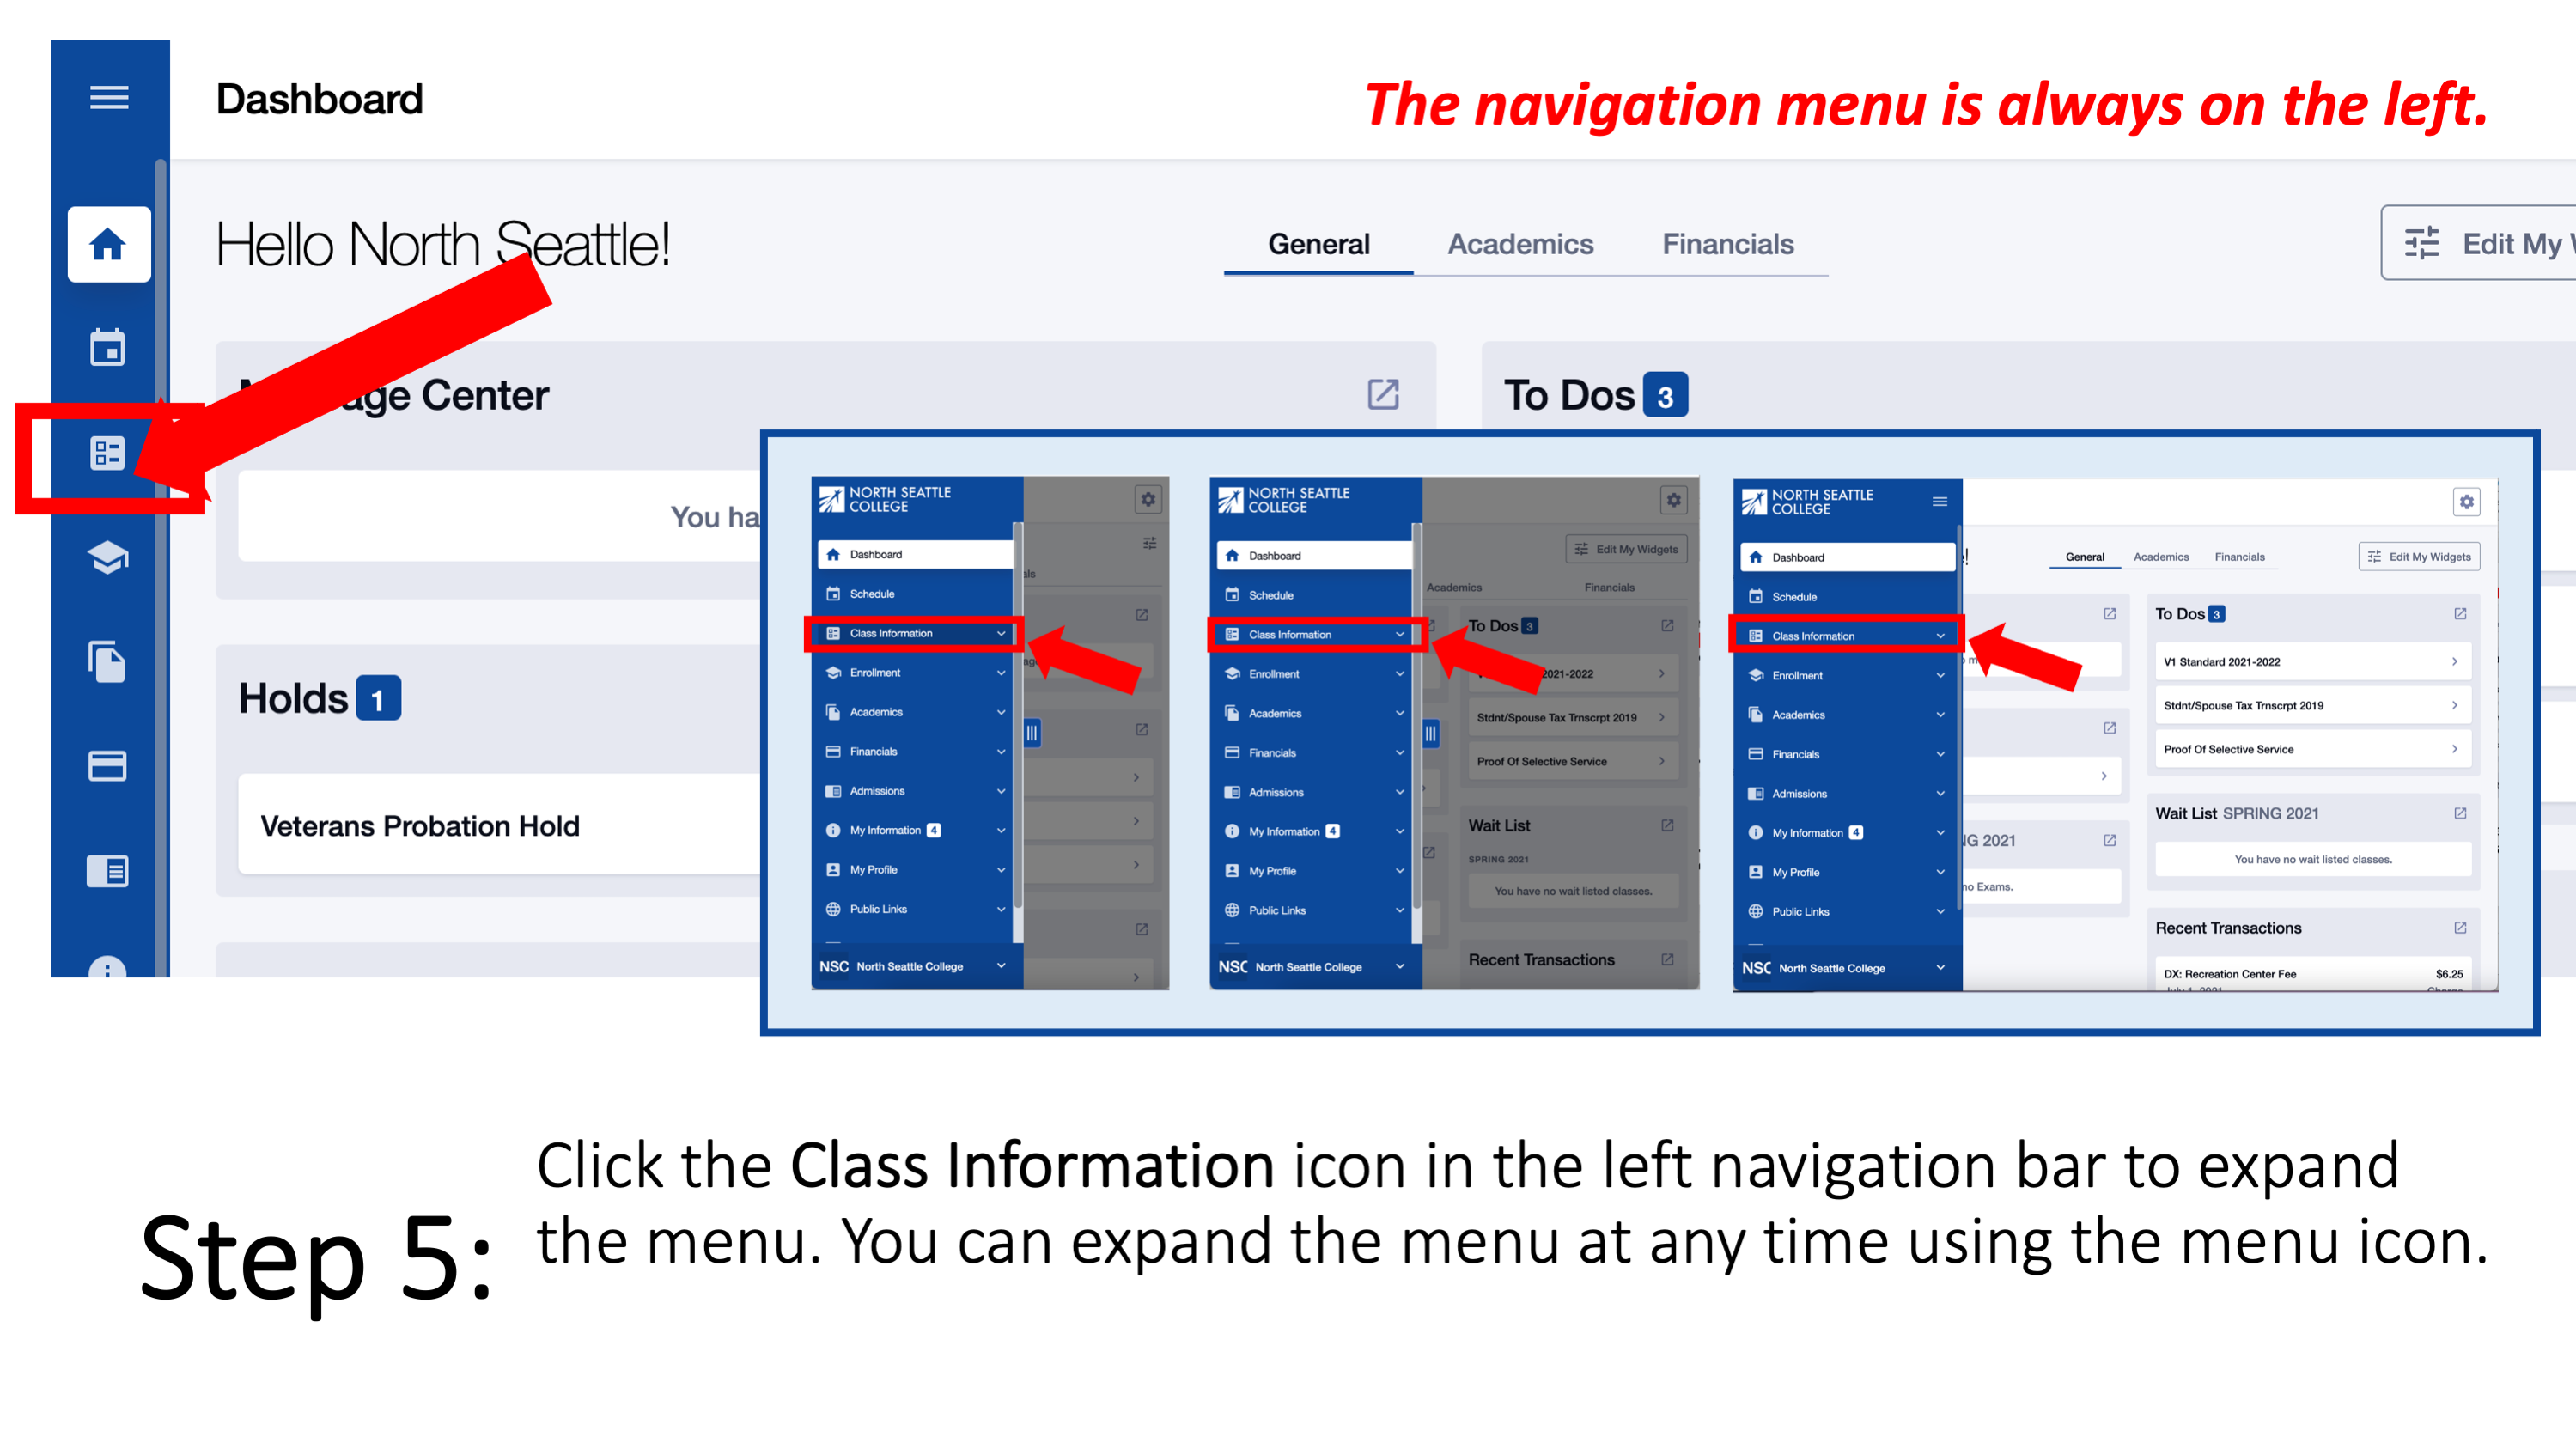 Step 5: Click the Class Information icon in the left navigation bar to expand the menu. You can expand the menu at any time using the menu icon. The navigation menu is always on the left.